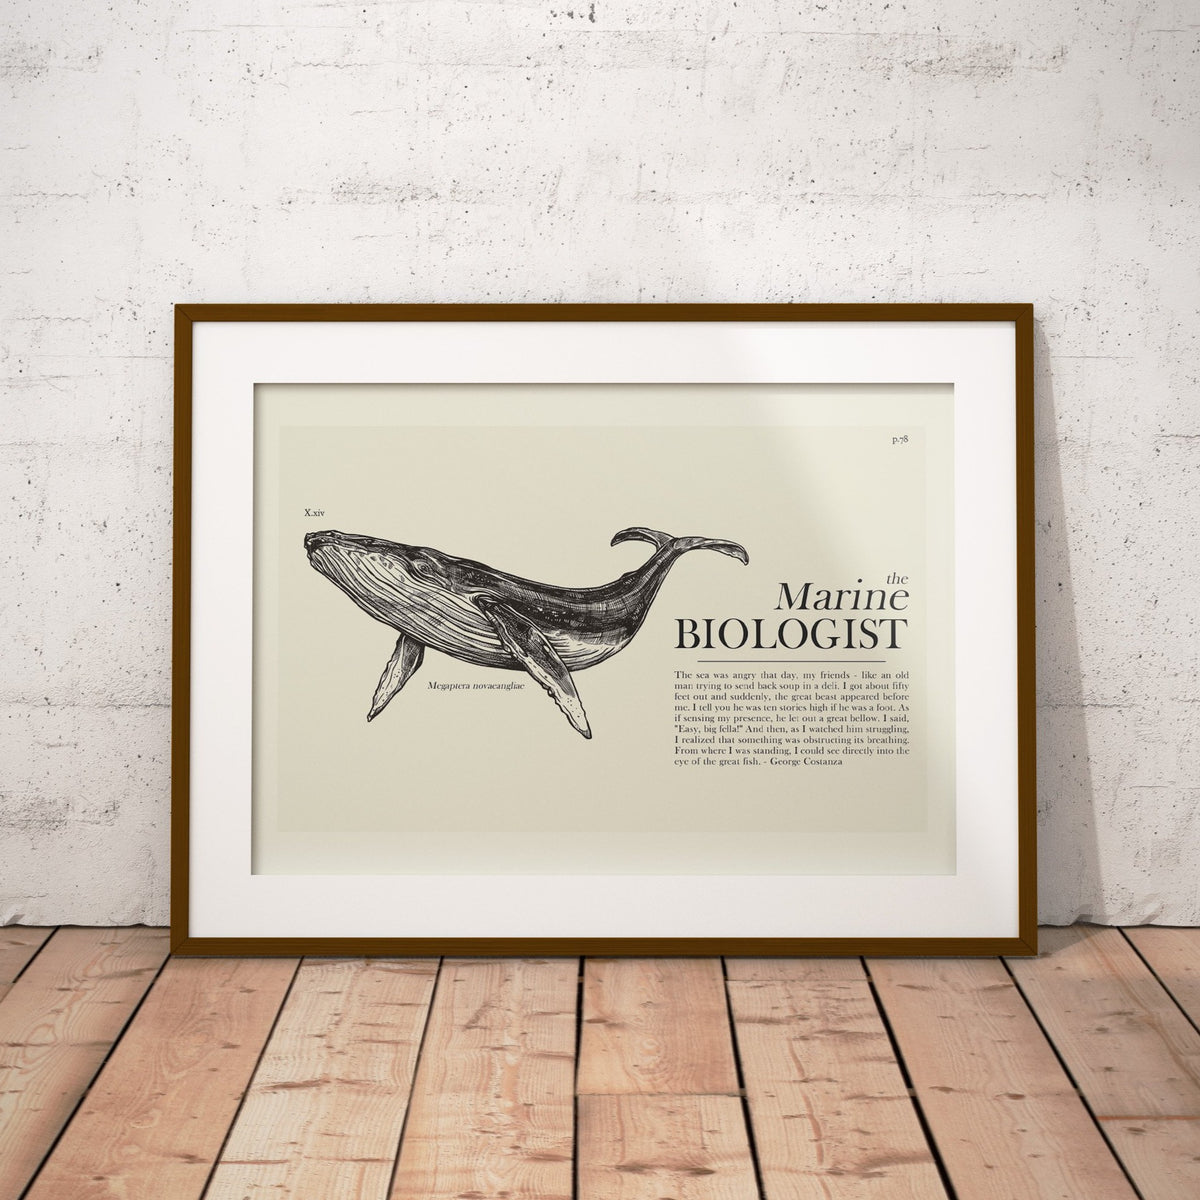 Seinfeld "The Marine Biologist" Schematic | 12"x18" or 18"x24" Print only